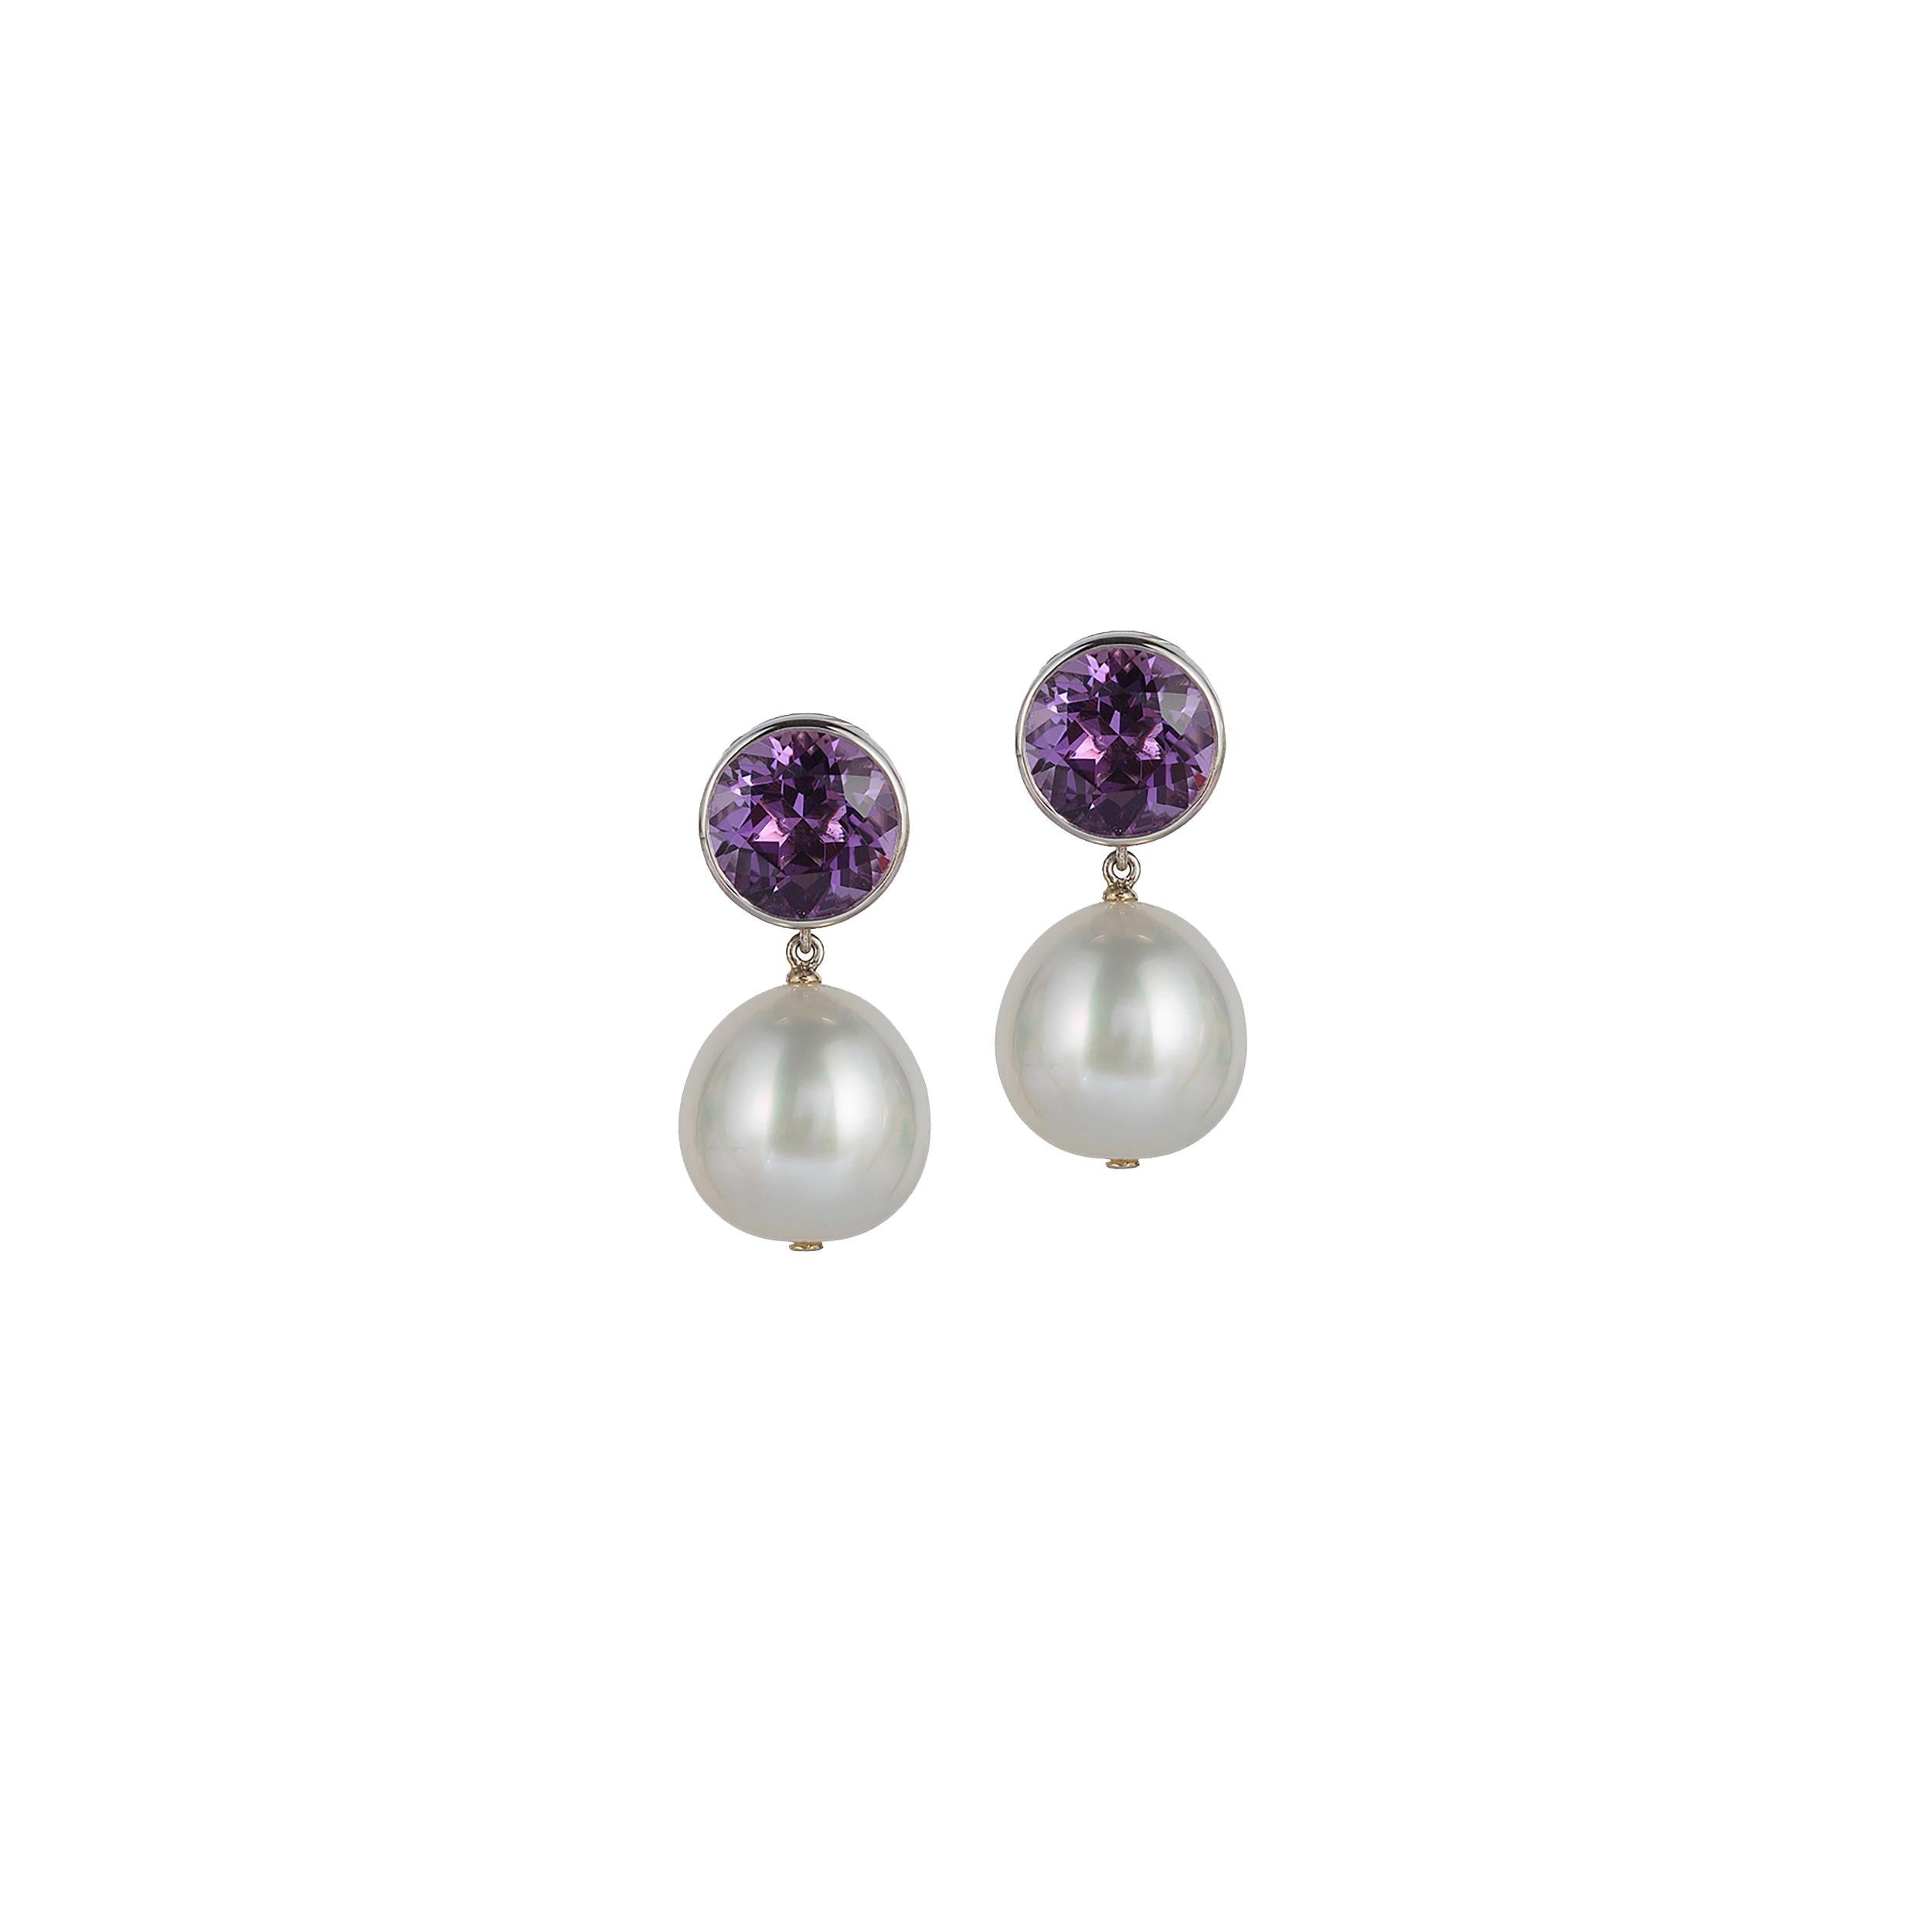 Bezel Set Round Amethyst Stud Earrings with White South Sea Pearls and Omega Clip, in 18K Yellow Gold, From 'Gossip' Collection
 
 Stone Size: 10 mm 
 
 Gemstone Weight: Blue Topaz- 6.80 Carats